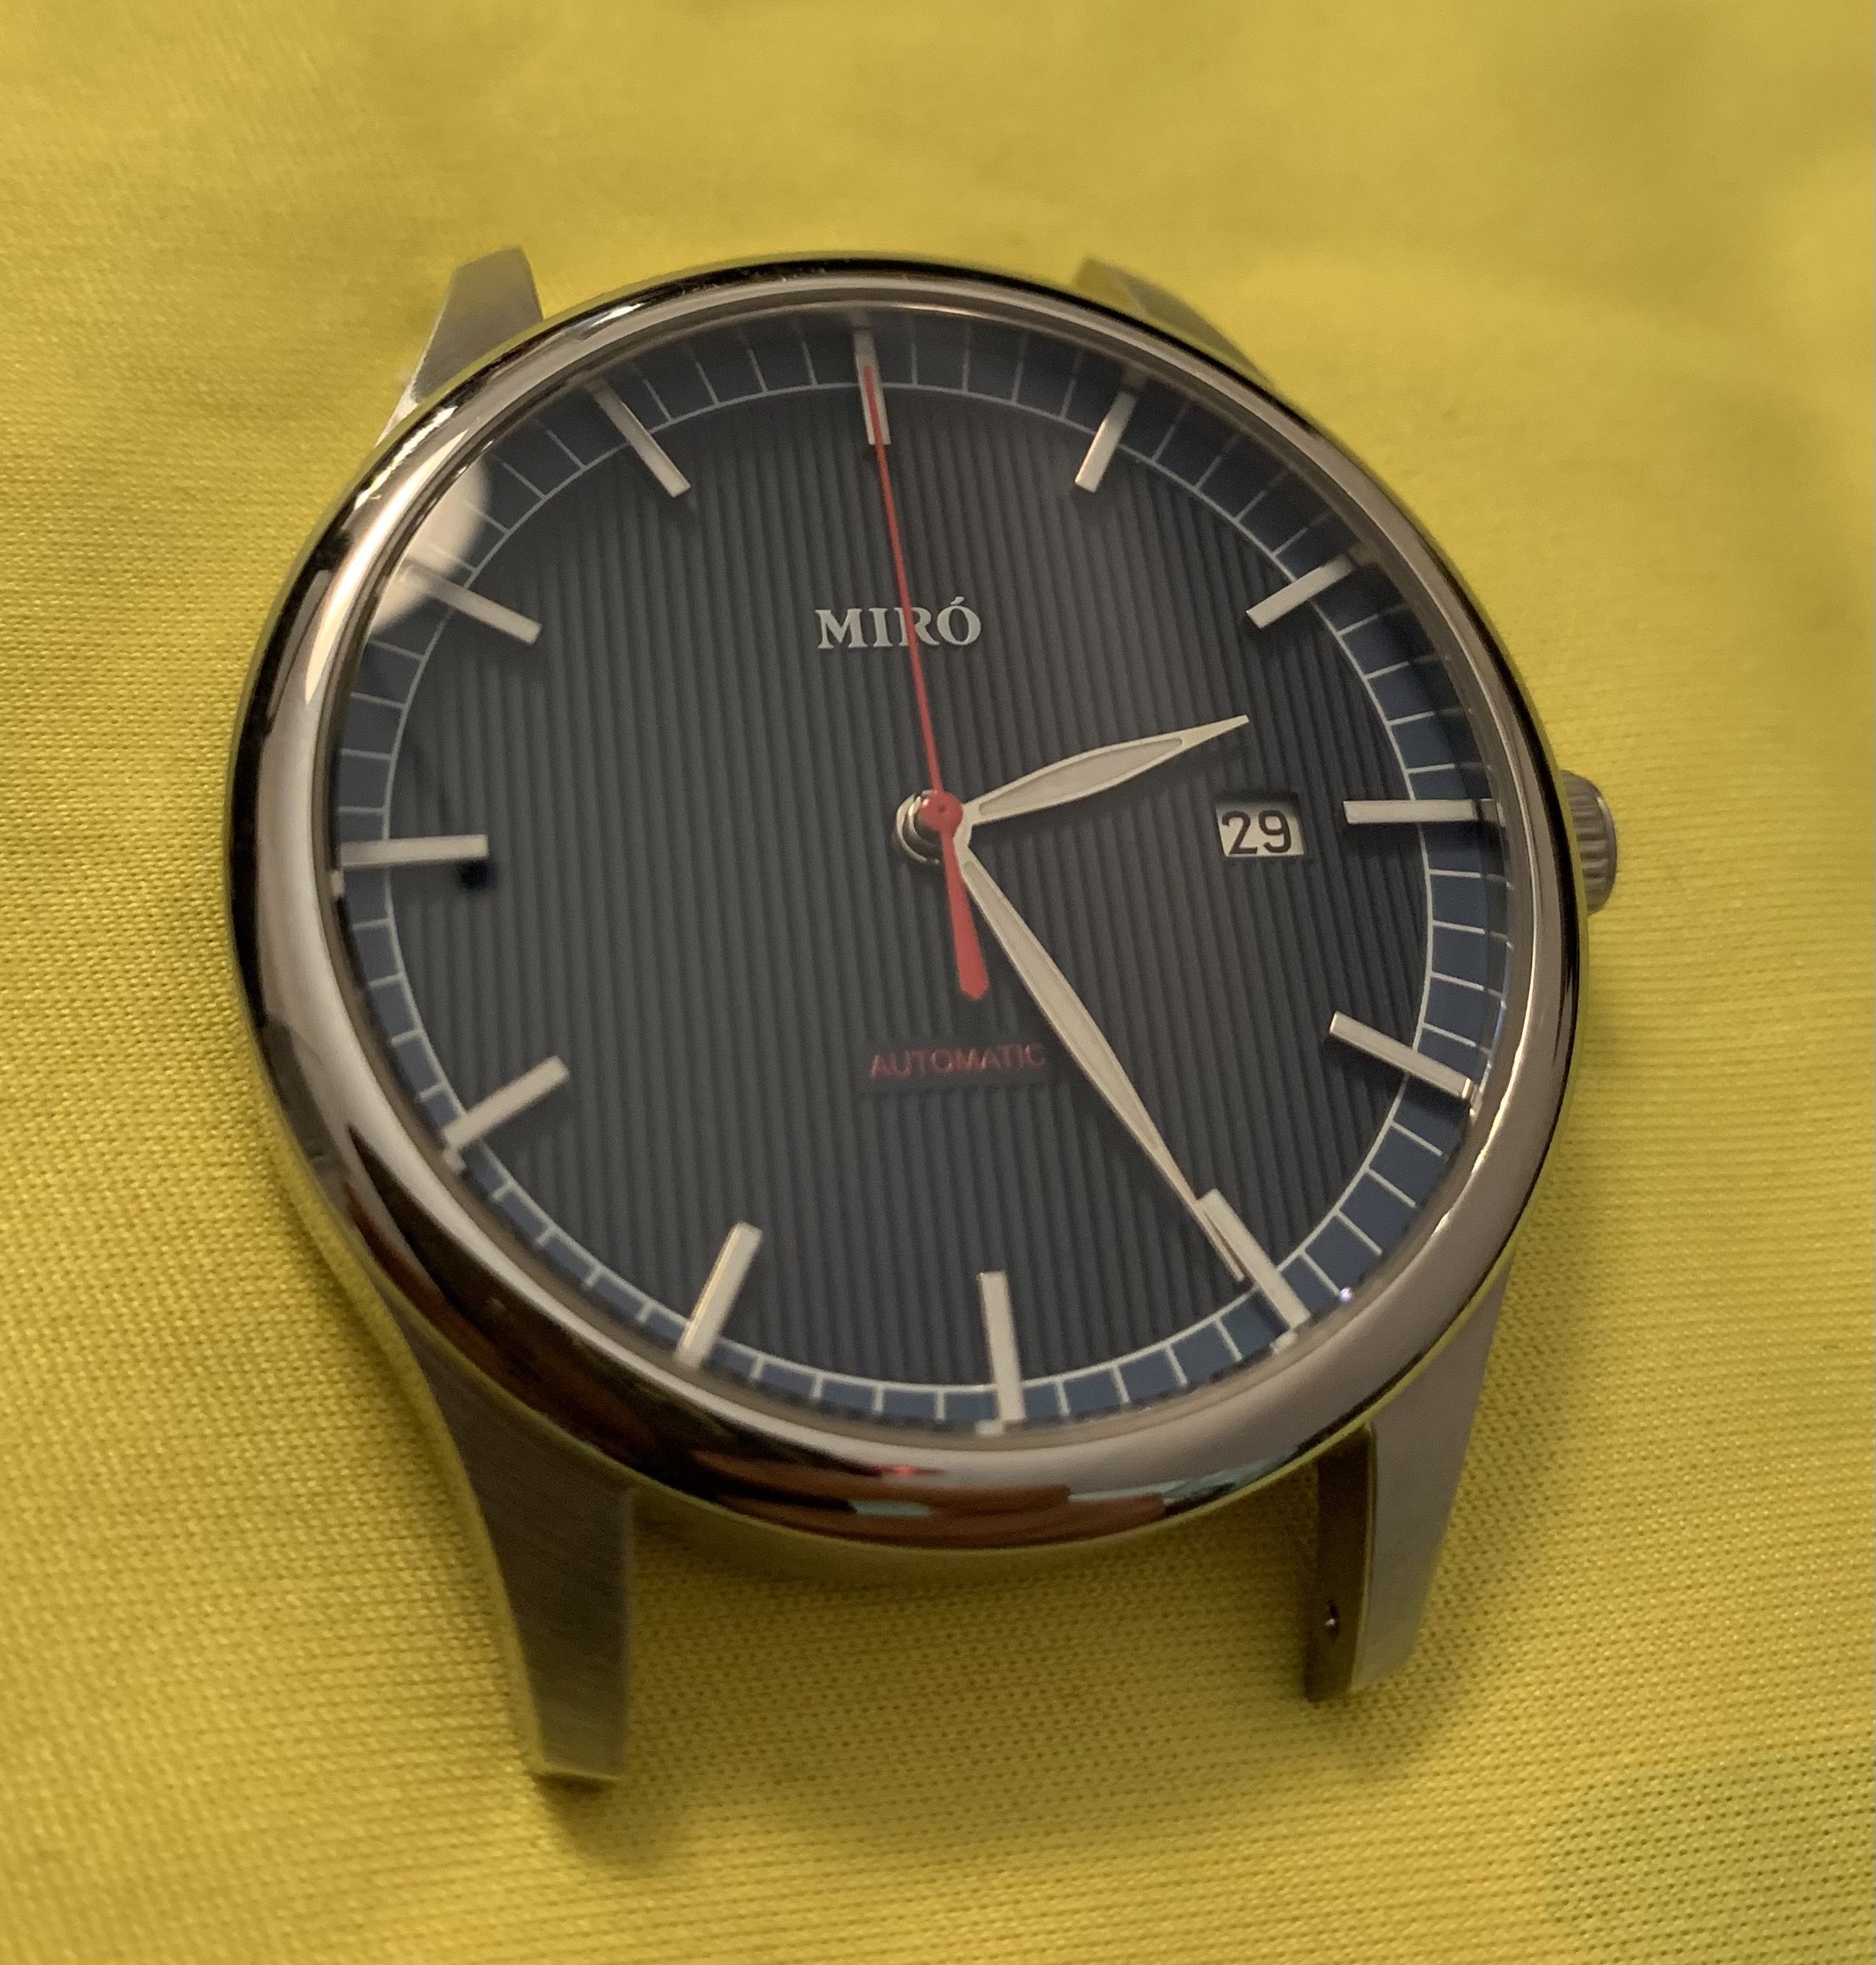 Miro Everyday Watch - made in Sweden, affordable Miyota 9015